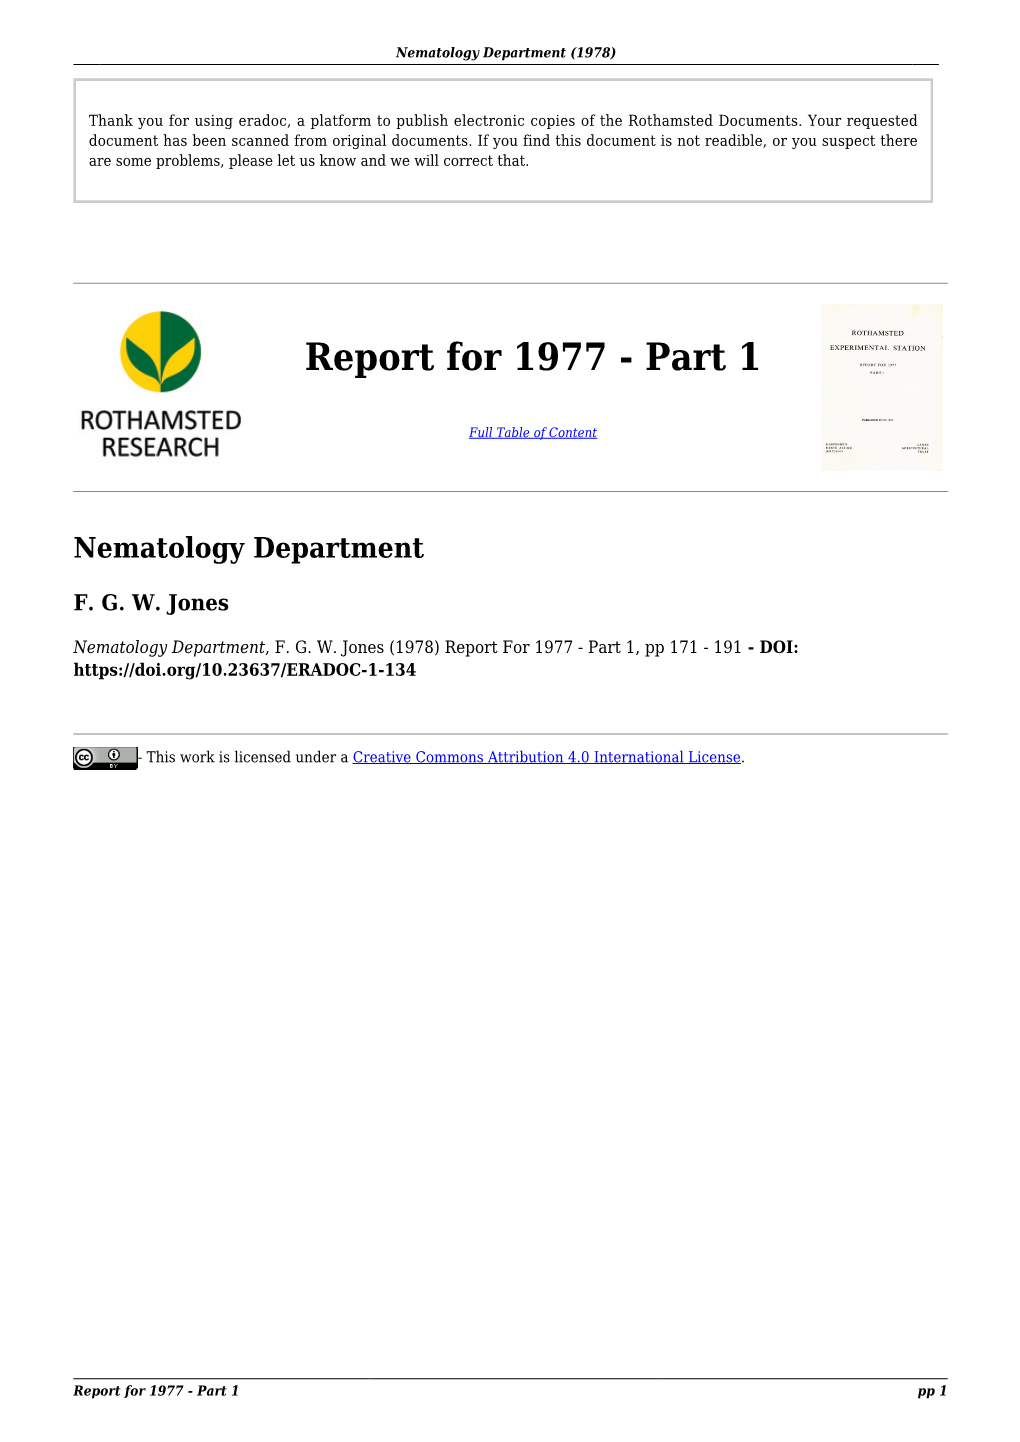 Report for 1977 - Part 1